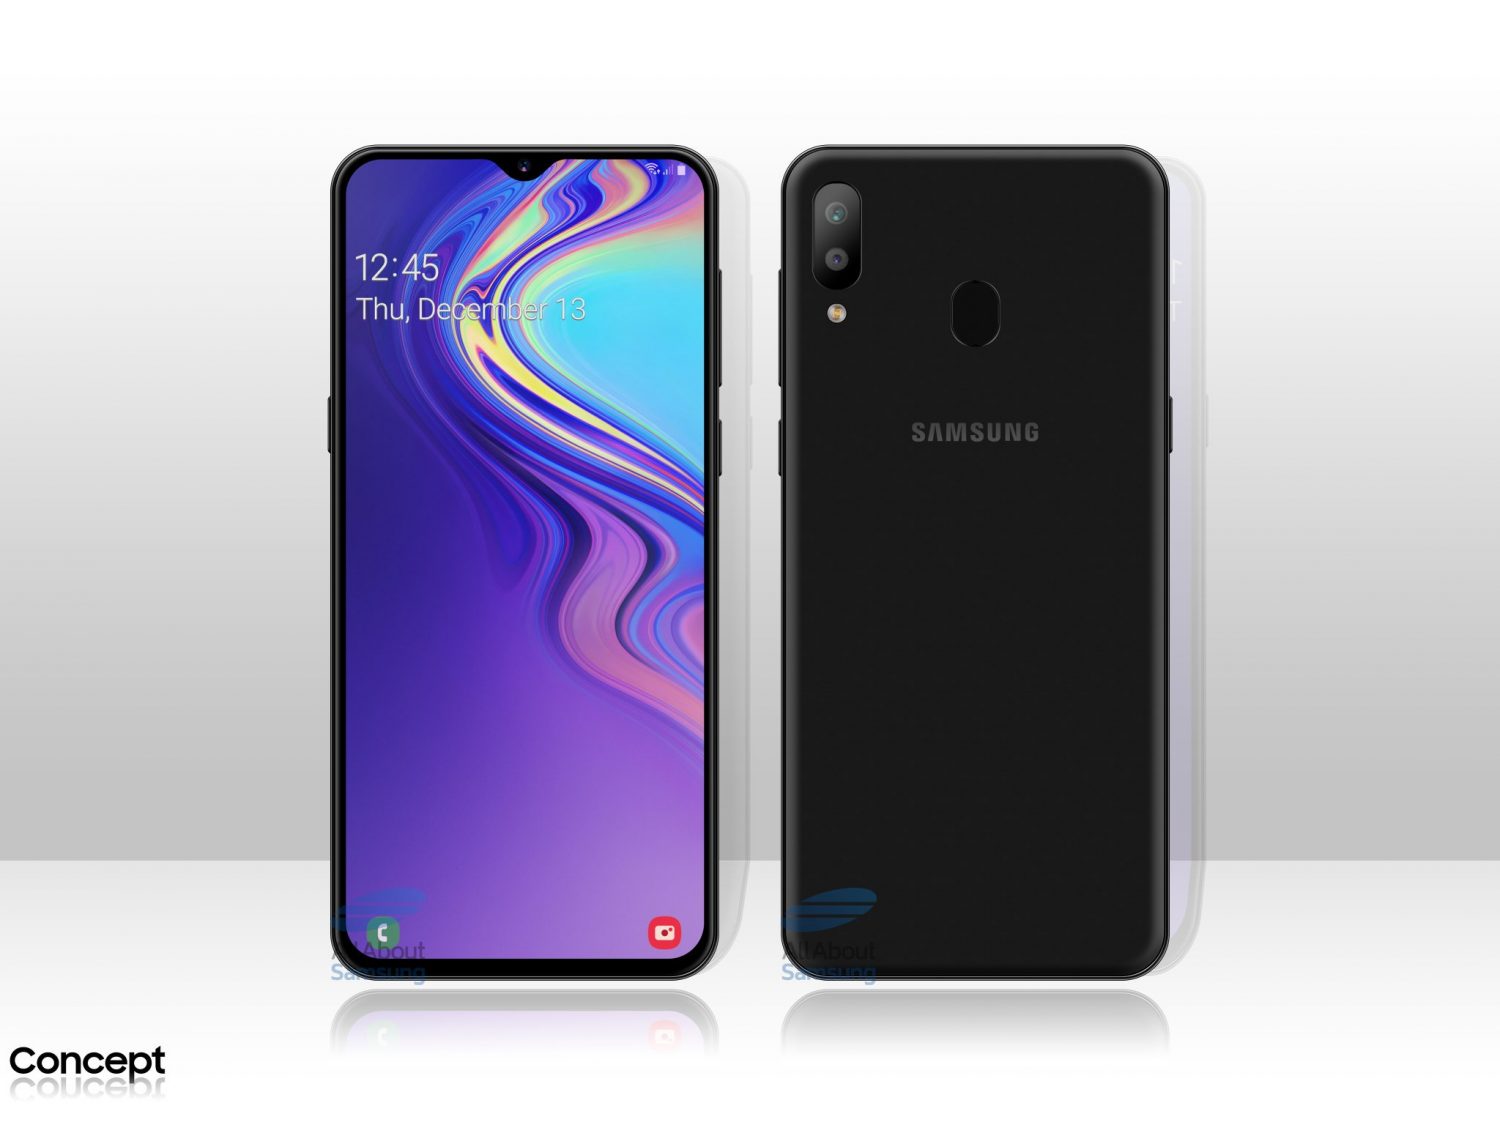 Samsung Galaxy M2 could be the first notched phone from the